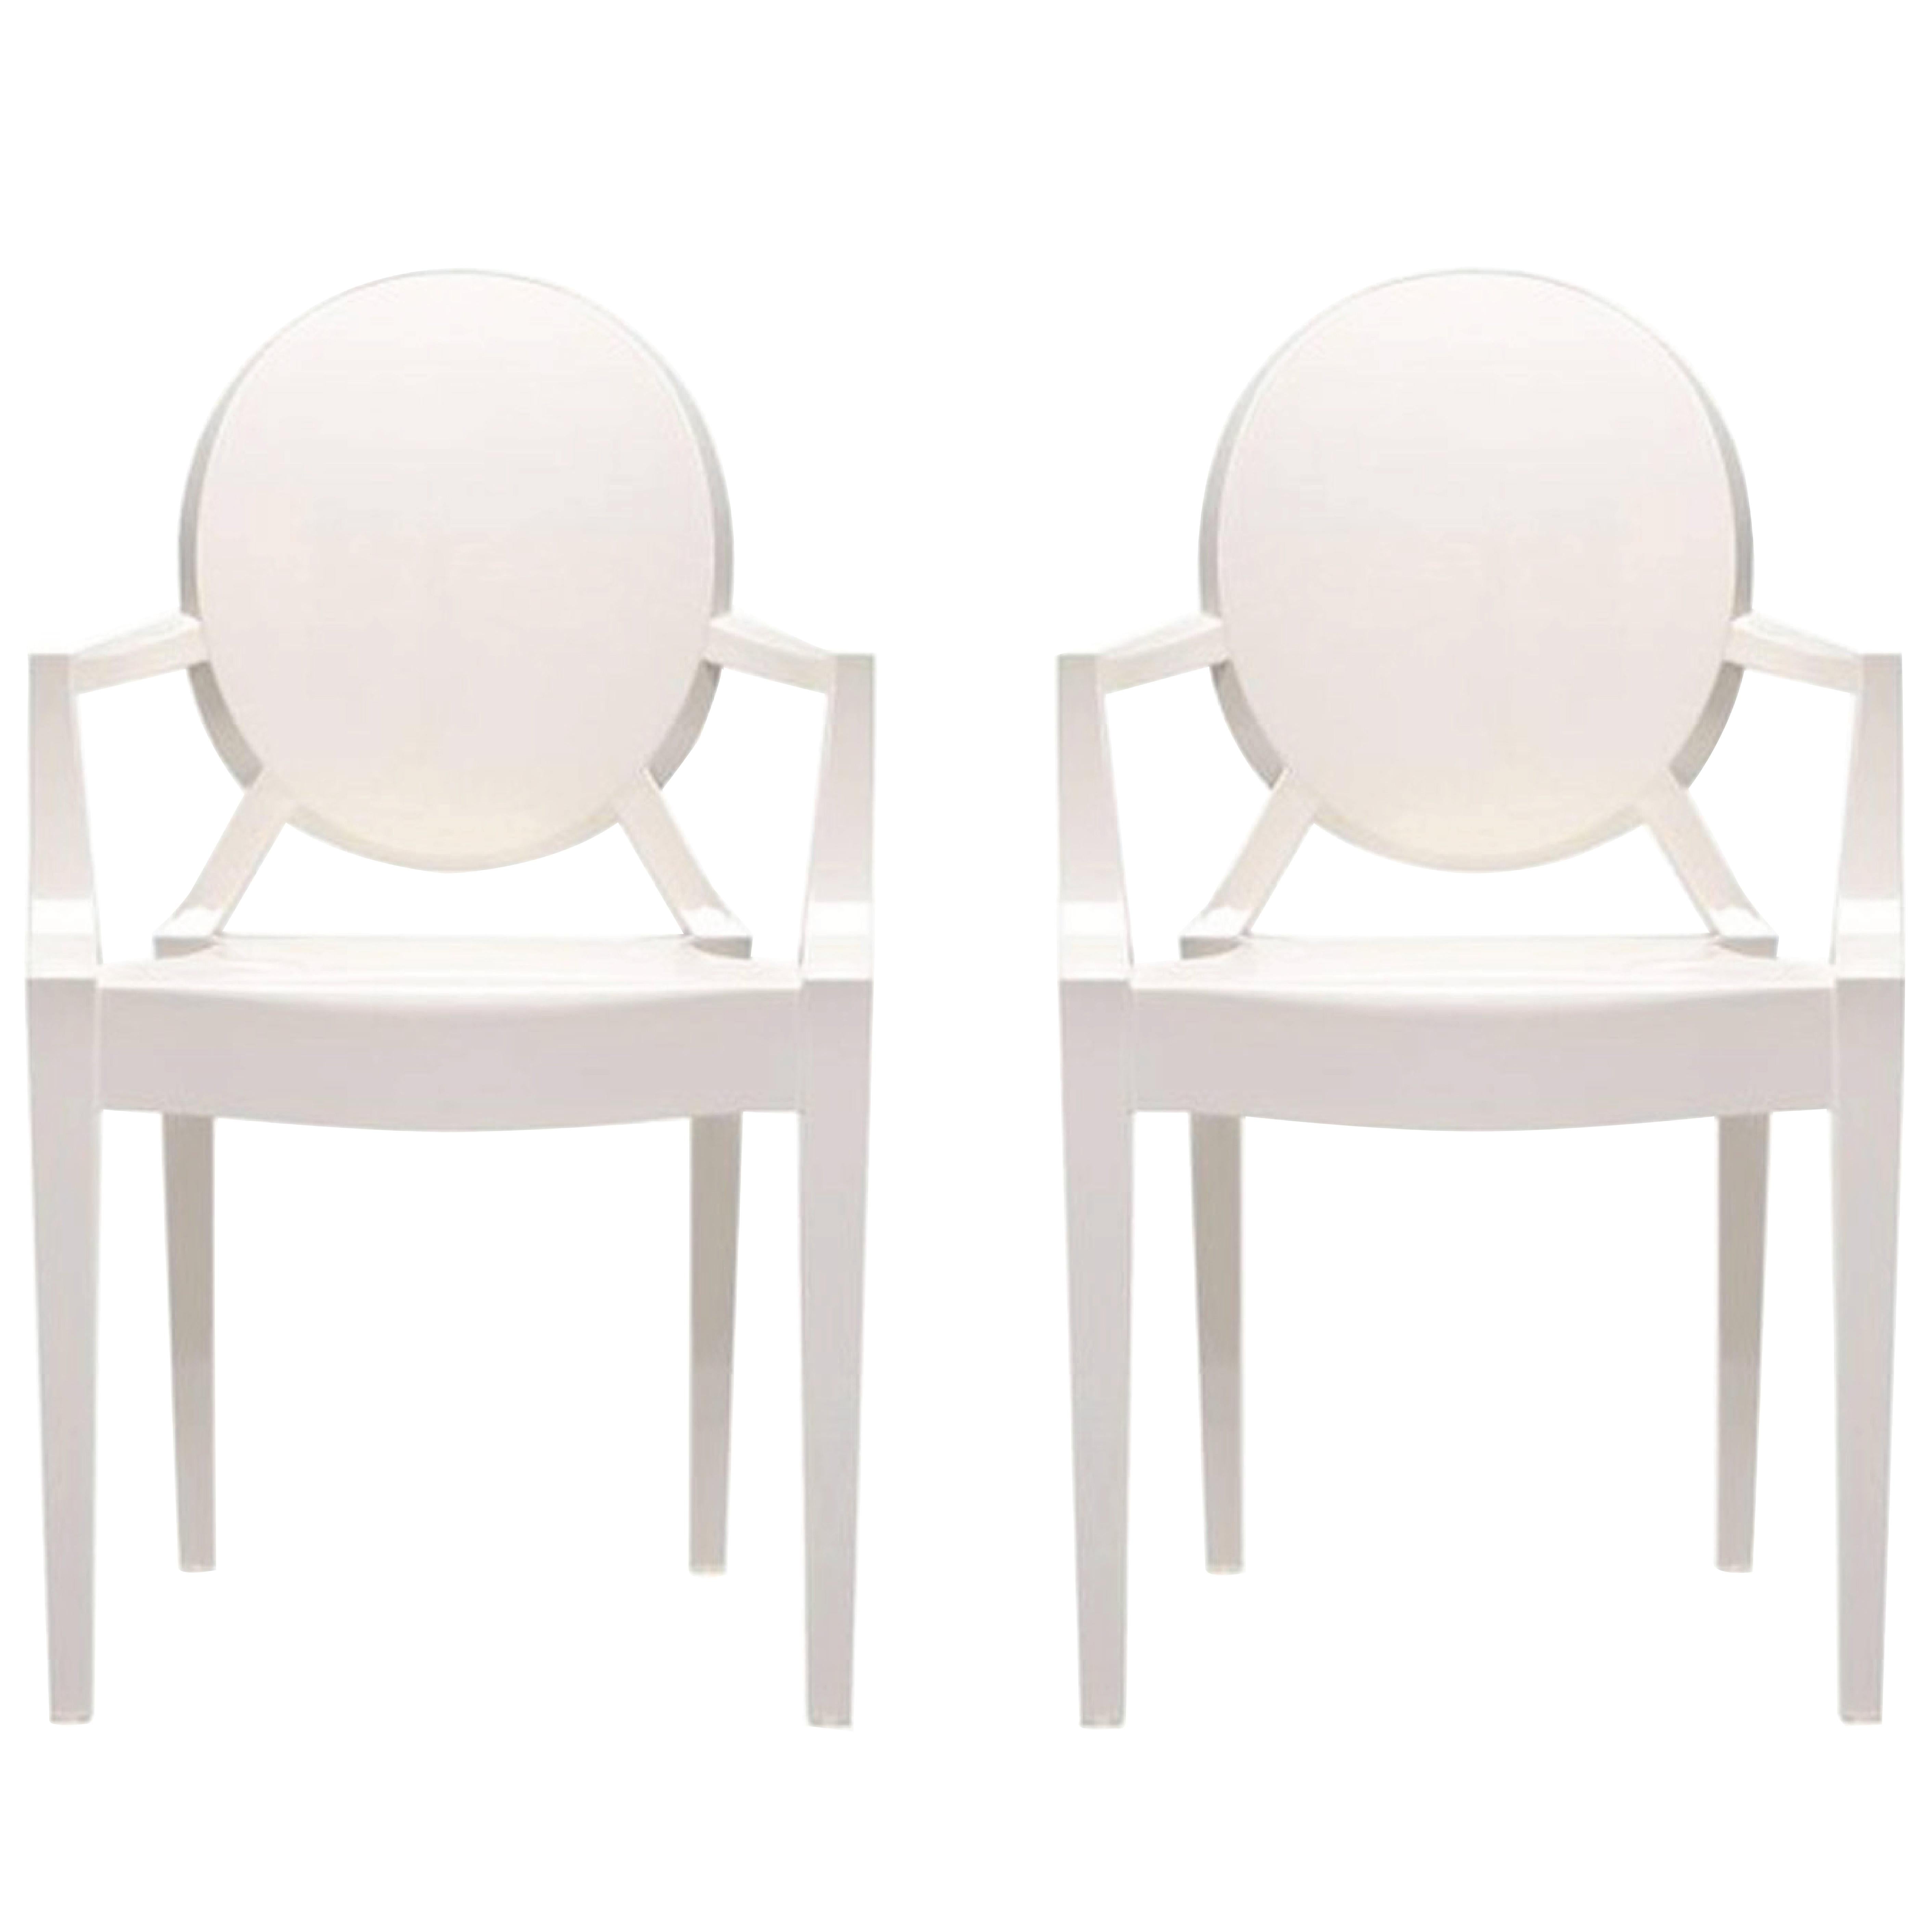 Starck Louis Chair - 4 For Sale on 1stDibs